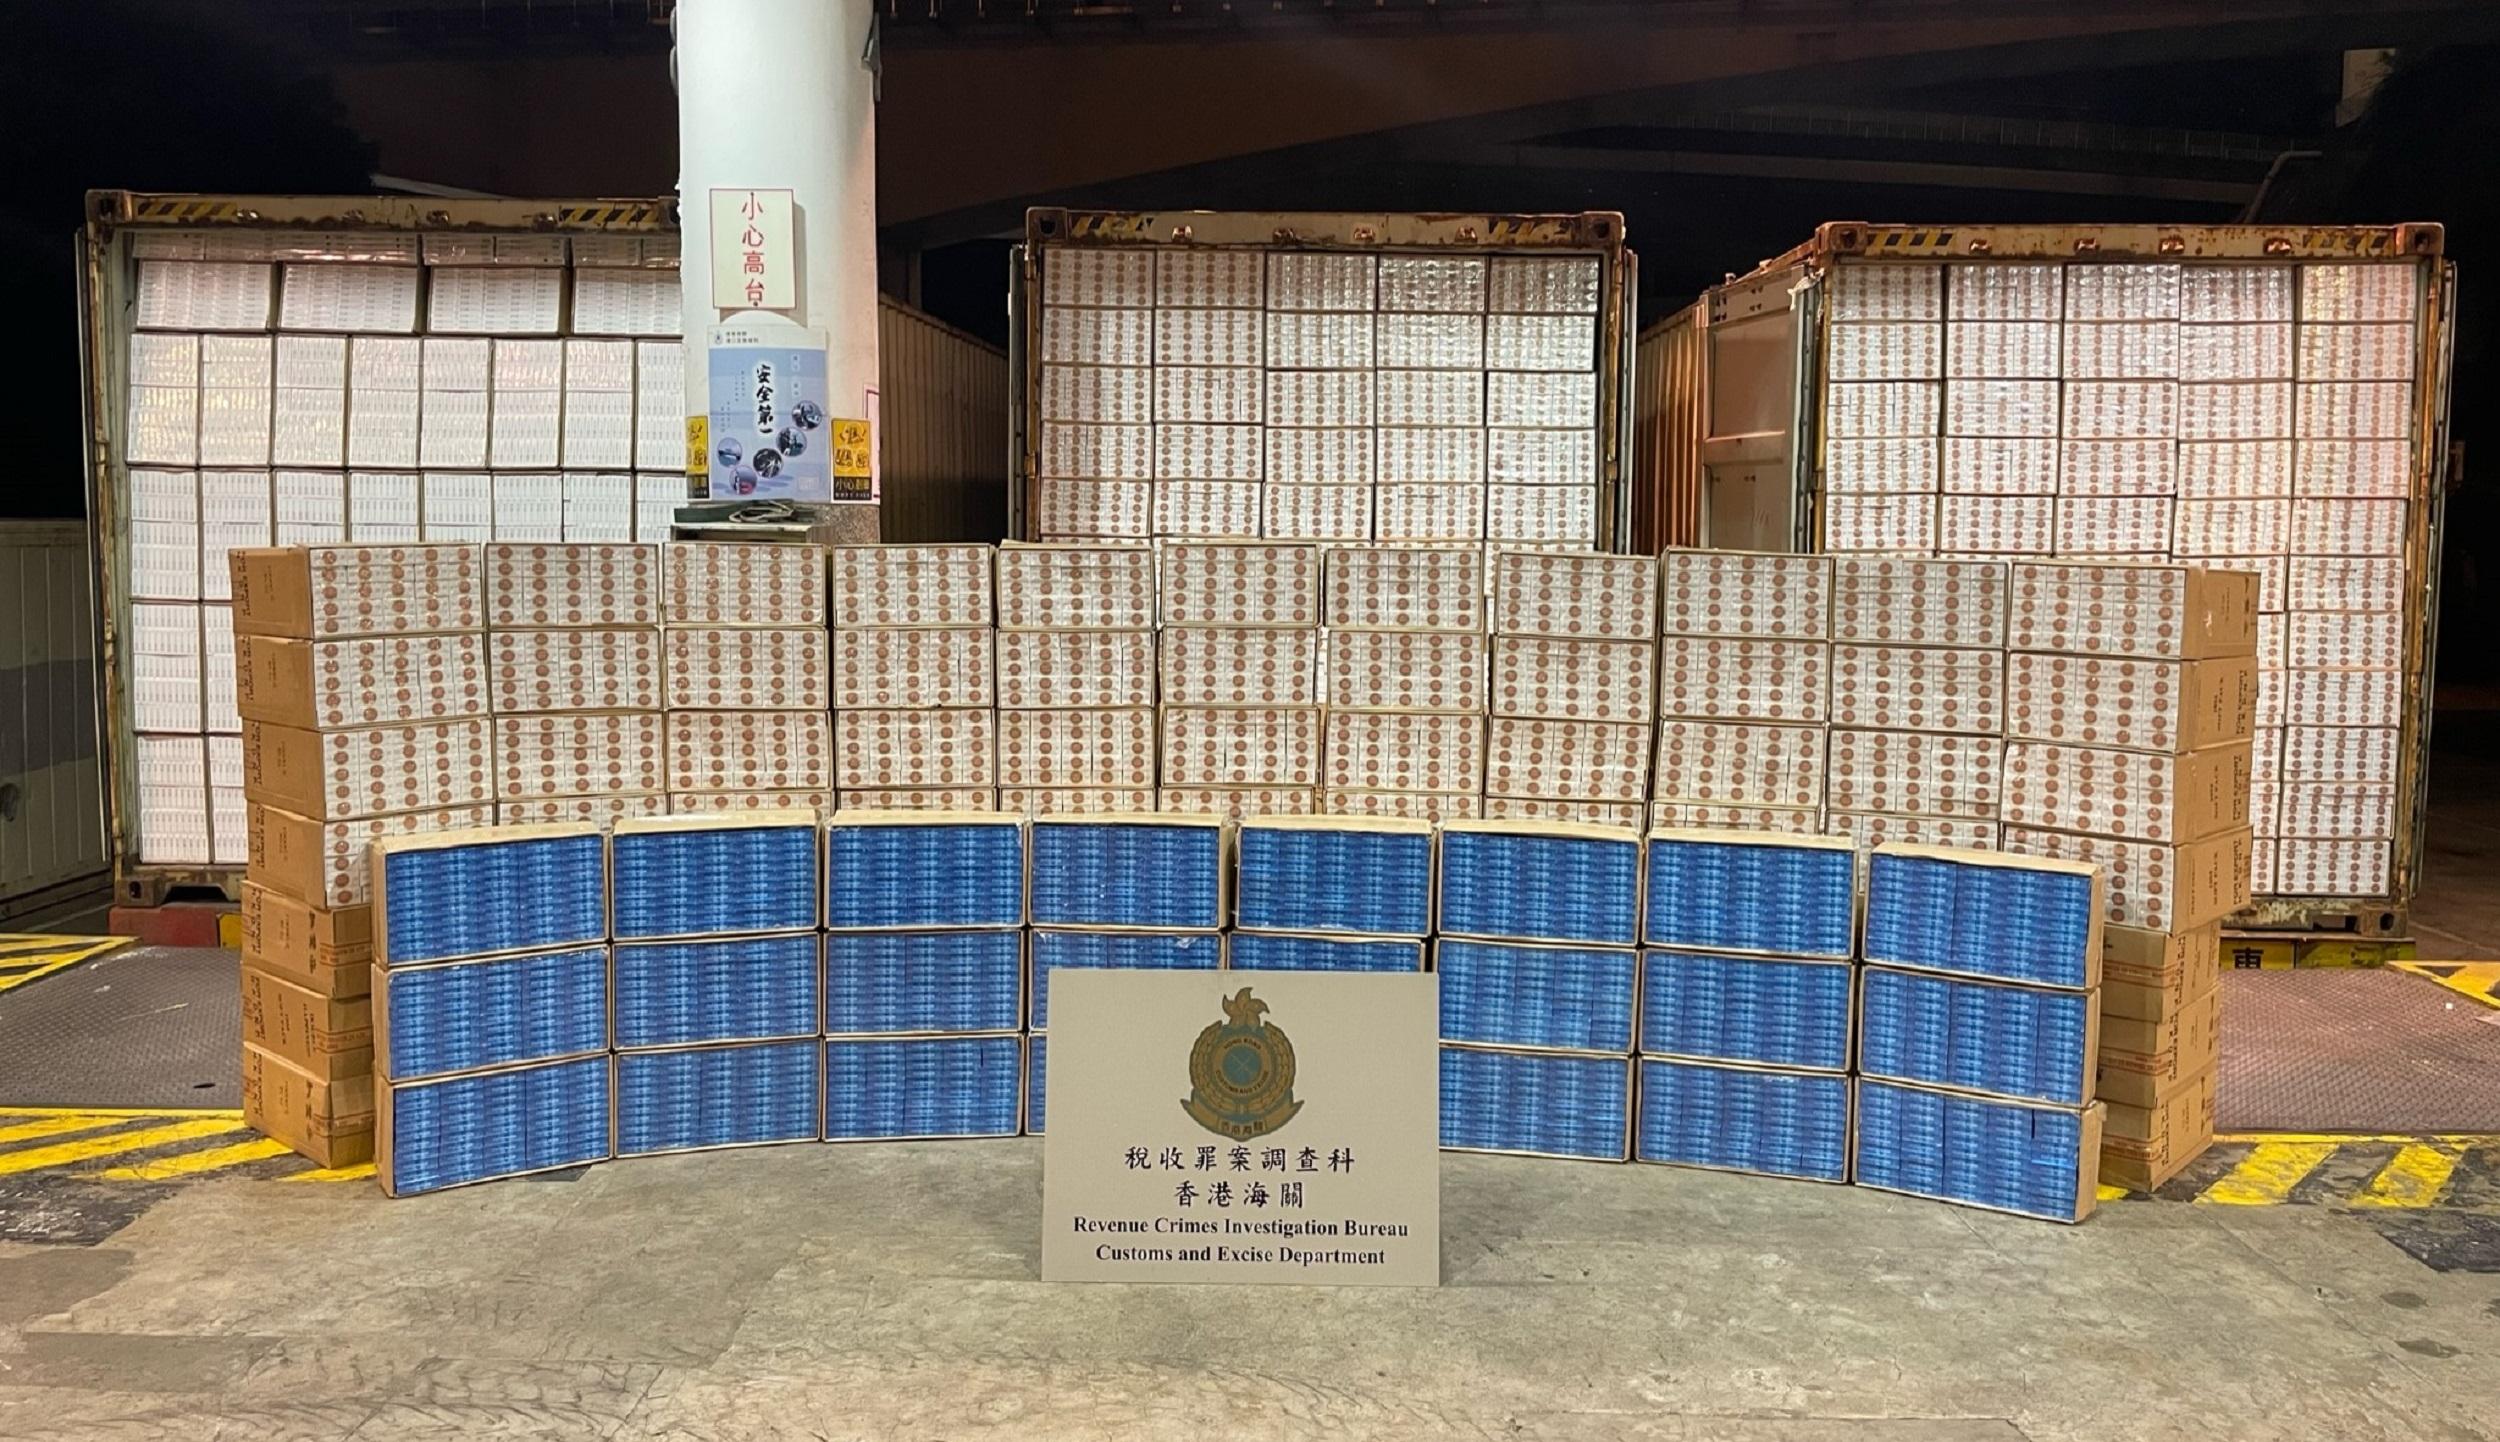 Hong Kong Customs on September 12 detected a large-scale illicit cigarette smuggling case and seized a total of about 39 million suspected illicit cigarettes with an estimated market value of about $106 million and a duty potential of about $73 million in Lau Fau Shan. Photo shows the suspected illicit cigarettes seized.